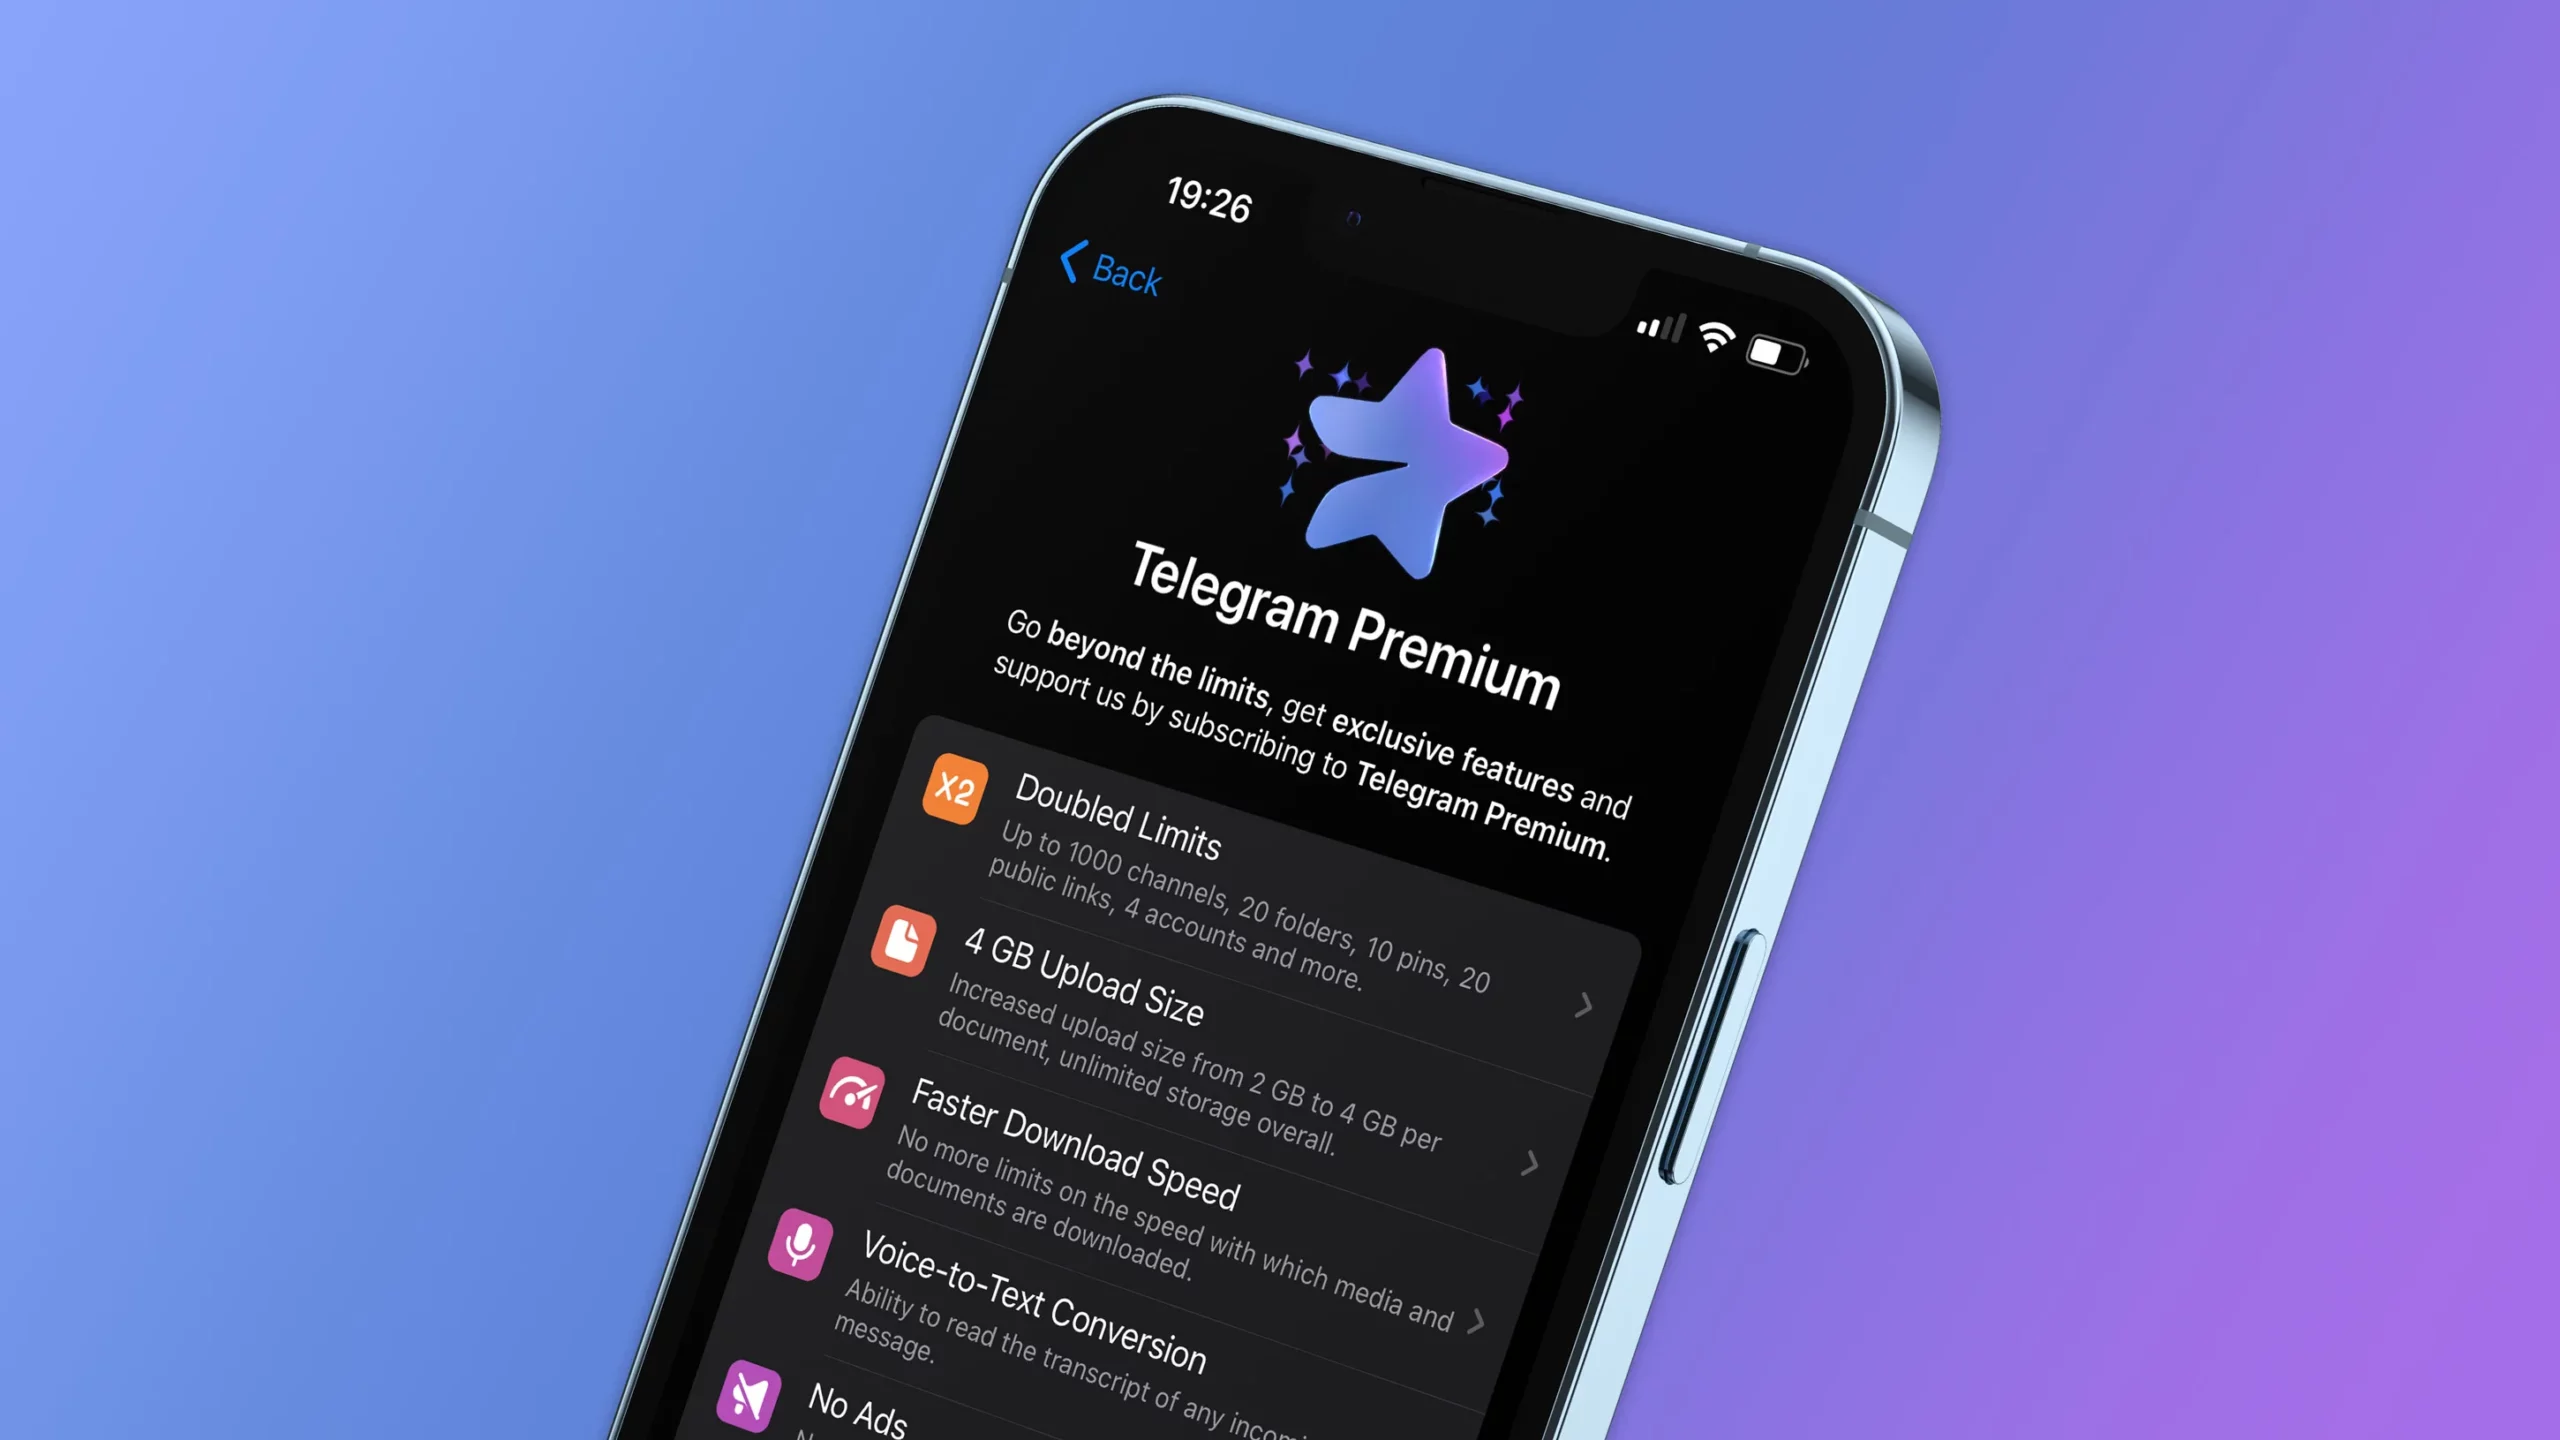 How To Subscribe For Telegram Premium